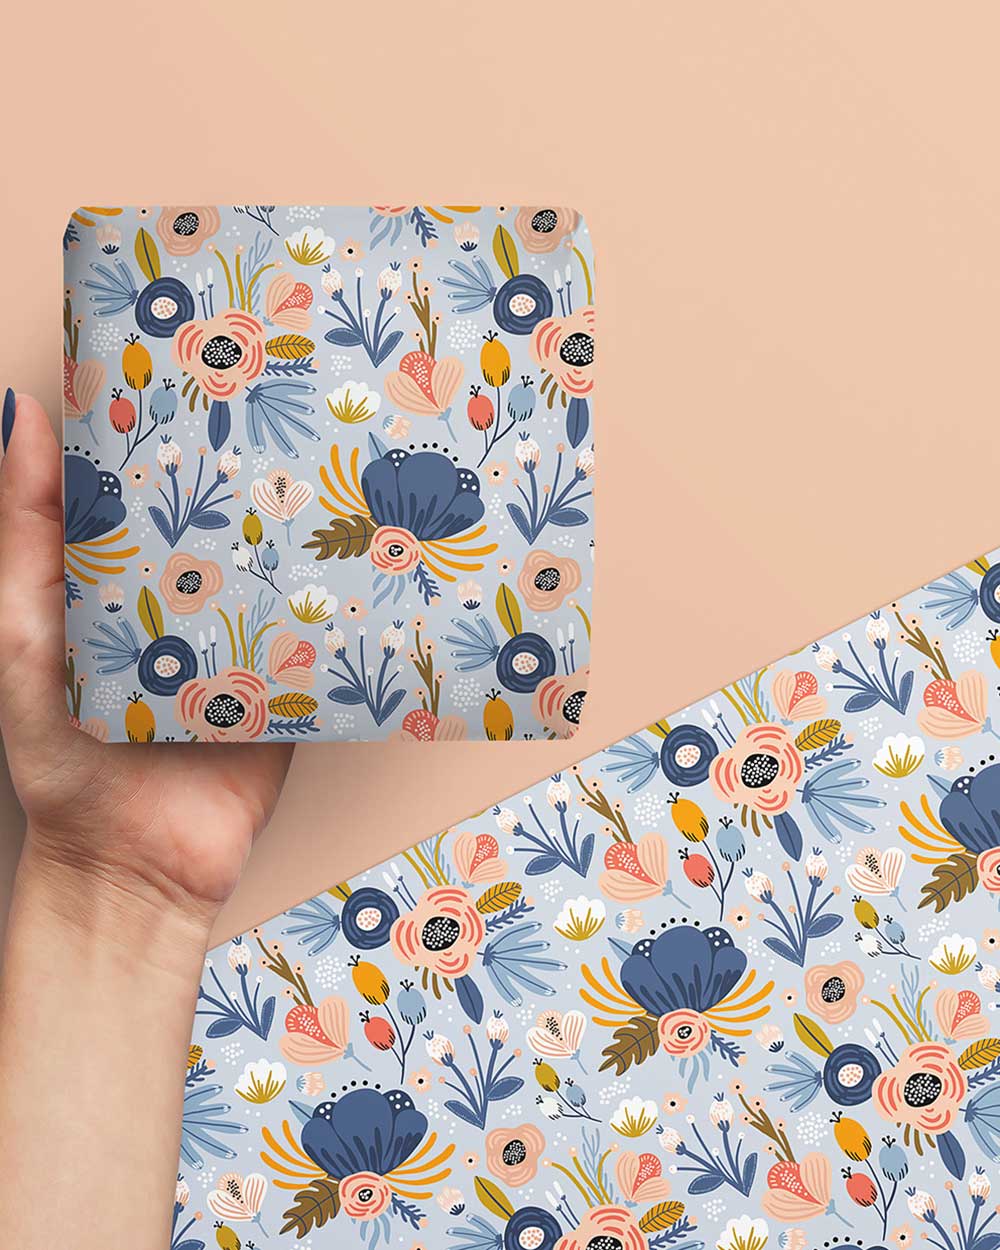 wrapped present in wrapping paper floral design